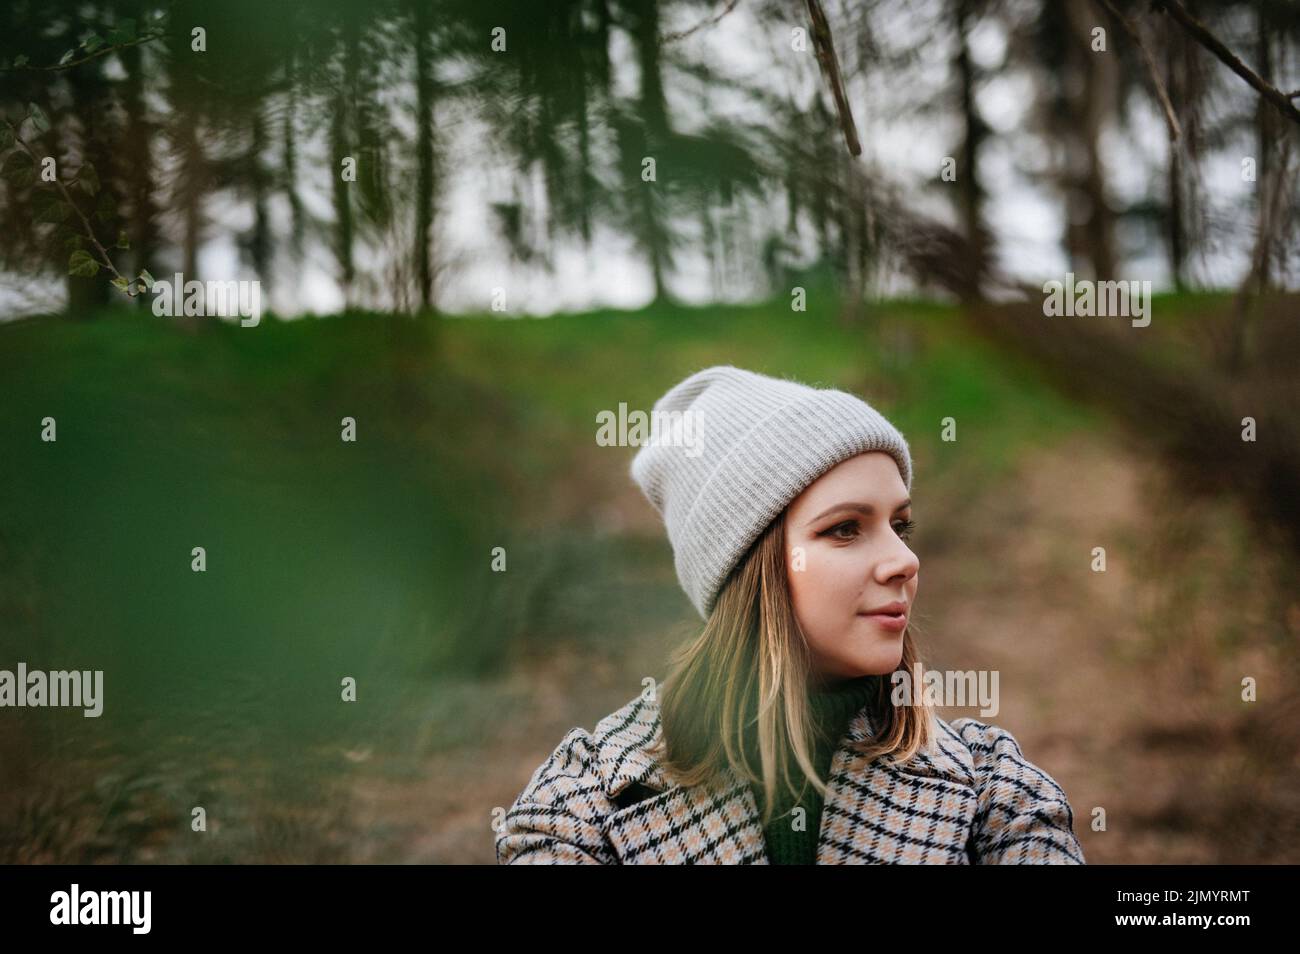 Portrait of young woman in coat and knitted cap in autumn nature, walking in forest. Stock Photo